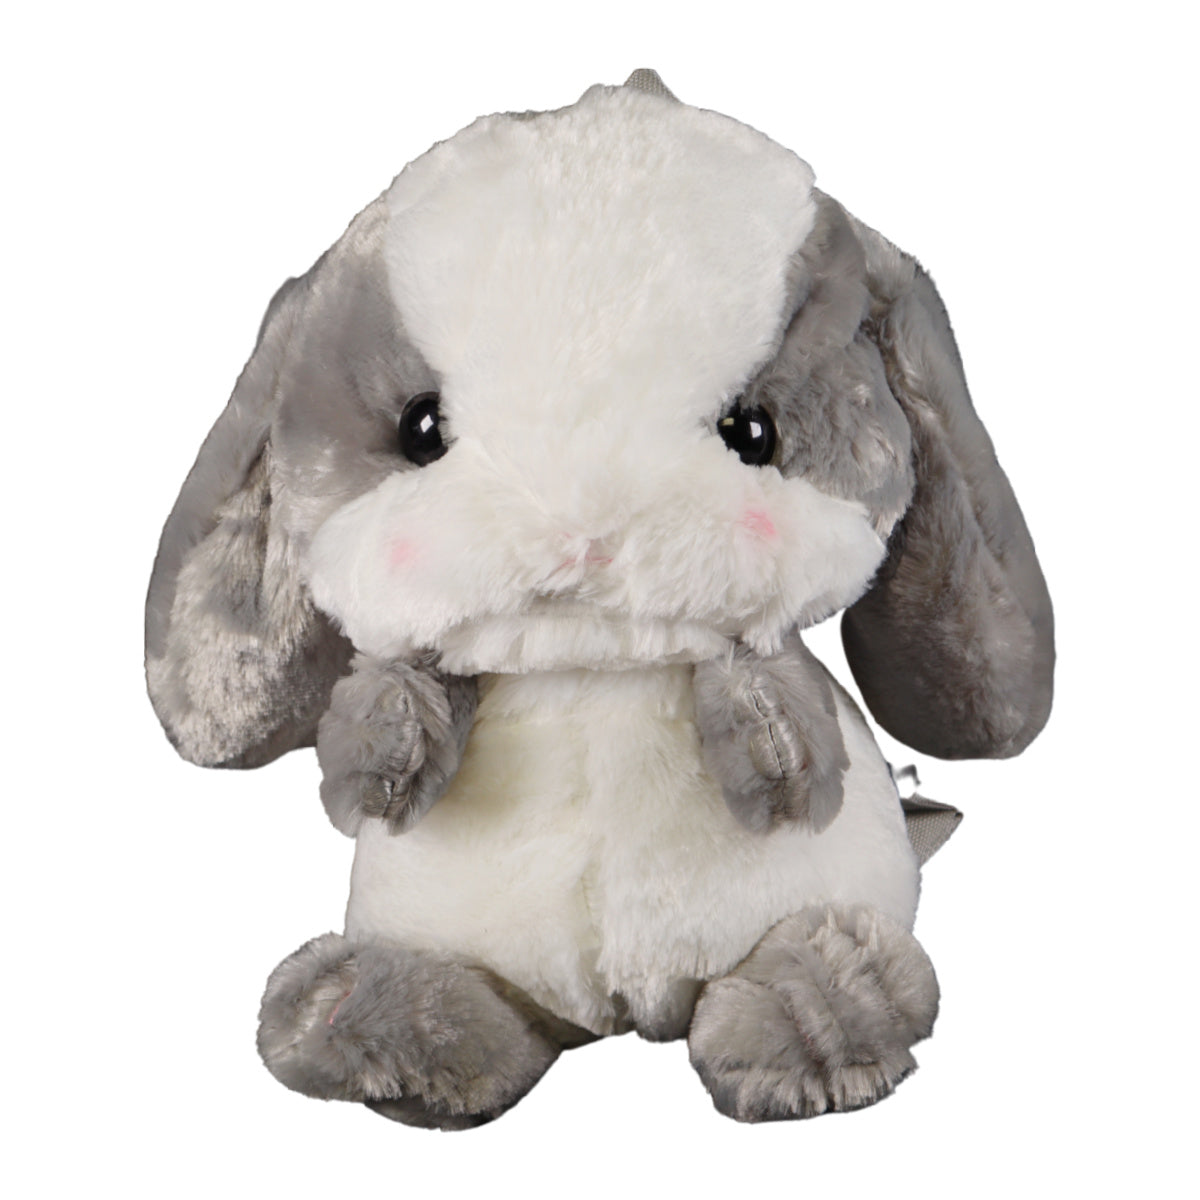 Bunny Plush Backpack - Gray and White